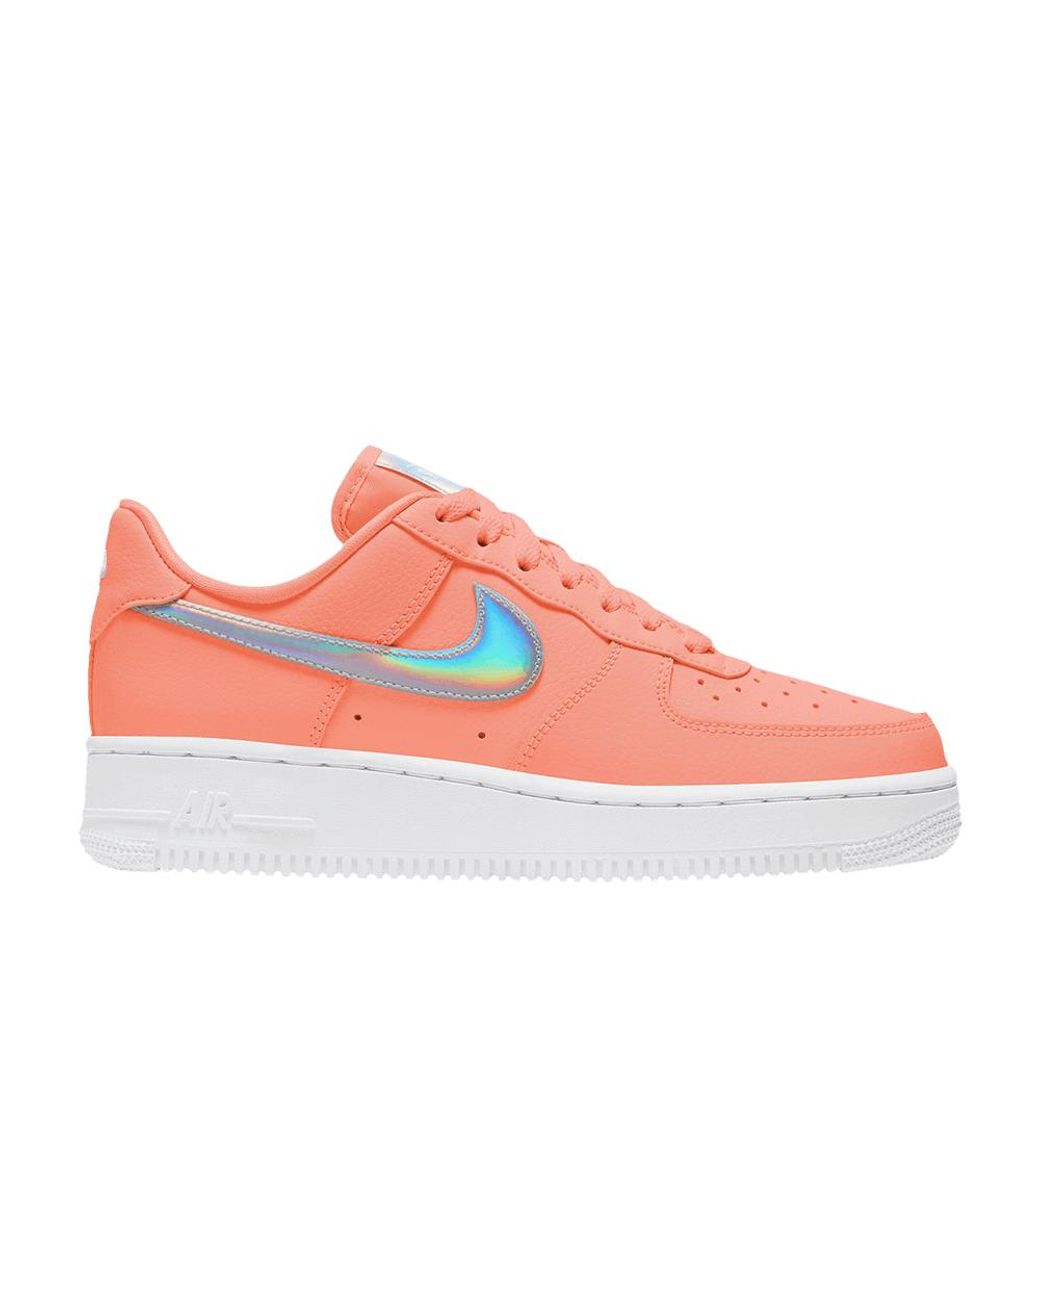 Nike Air 1 Low Pink Iridescent' | Lyst